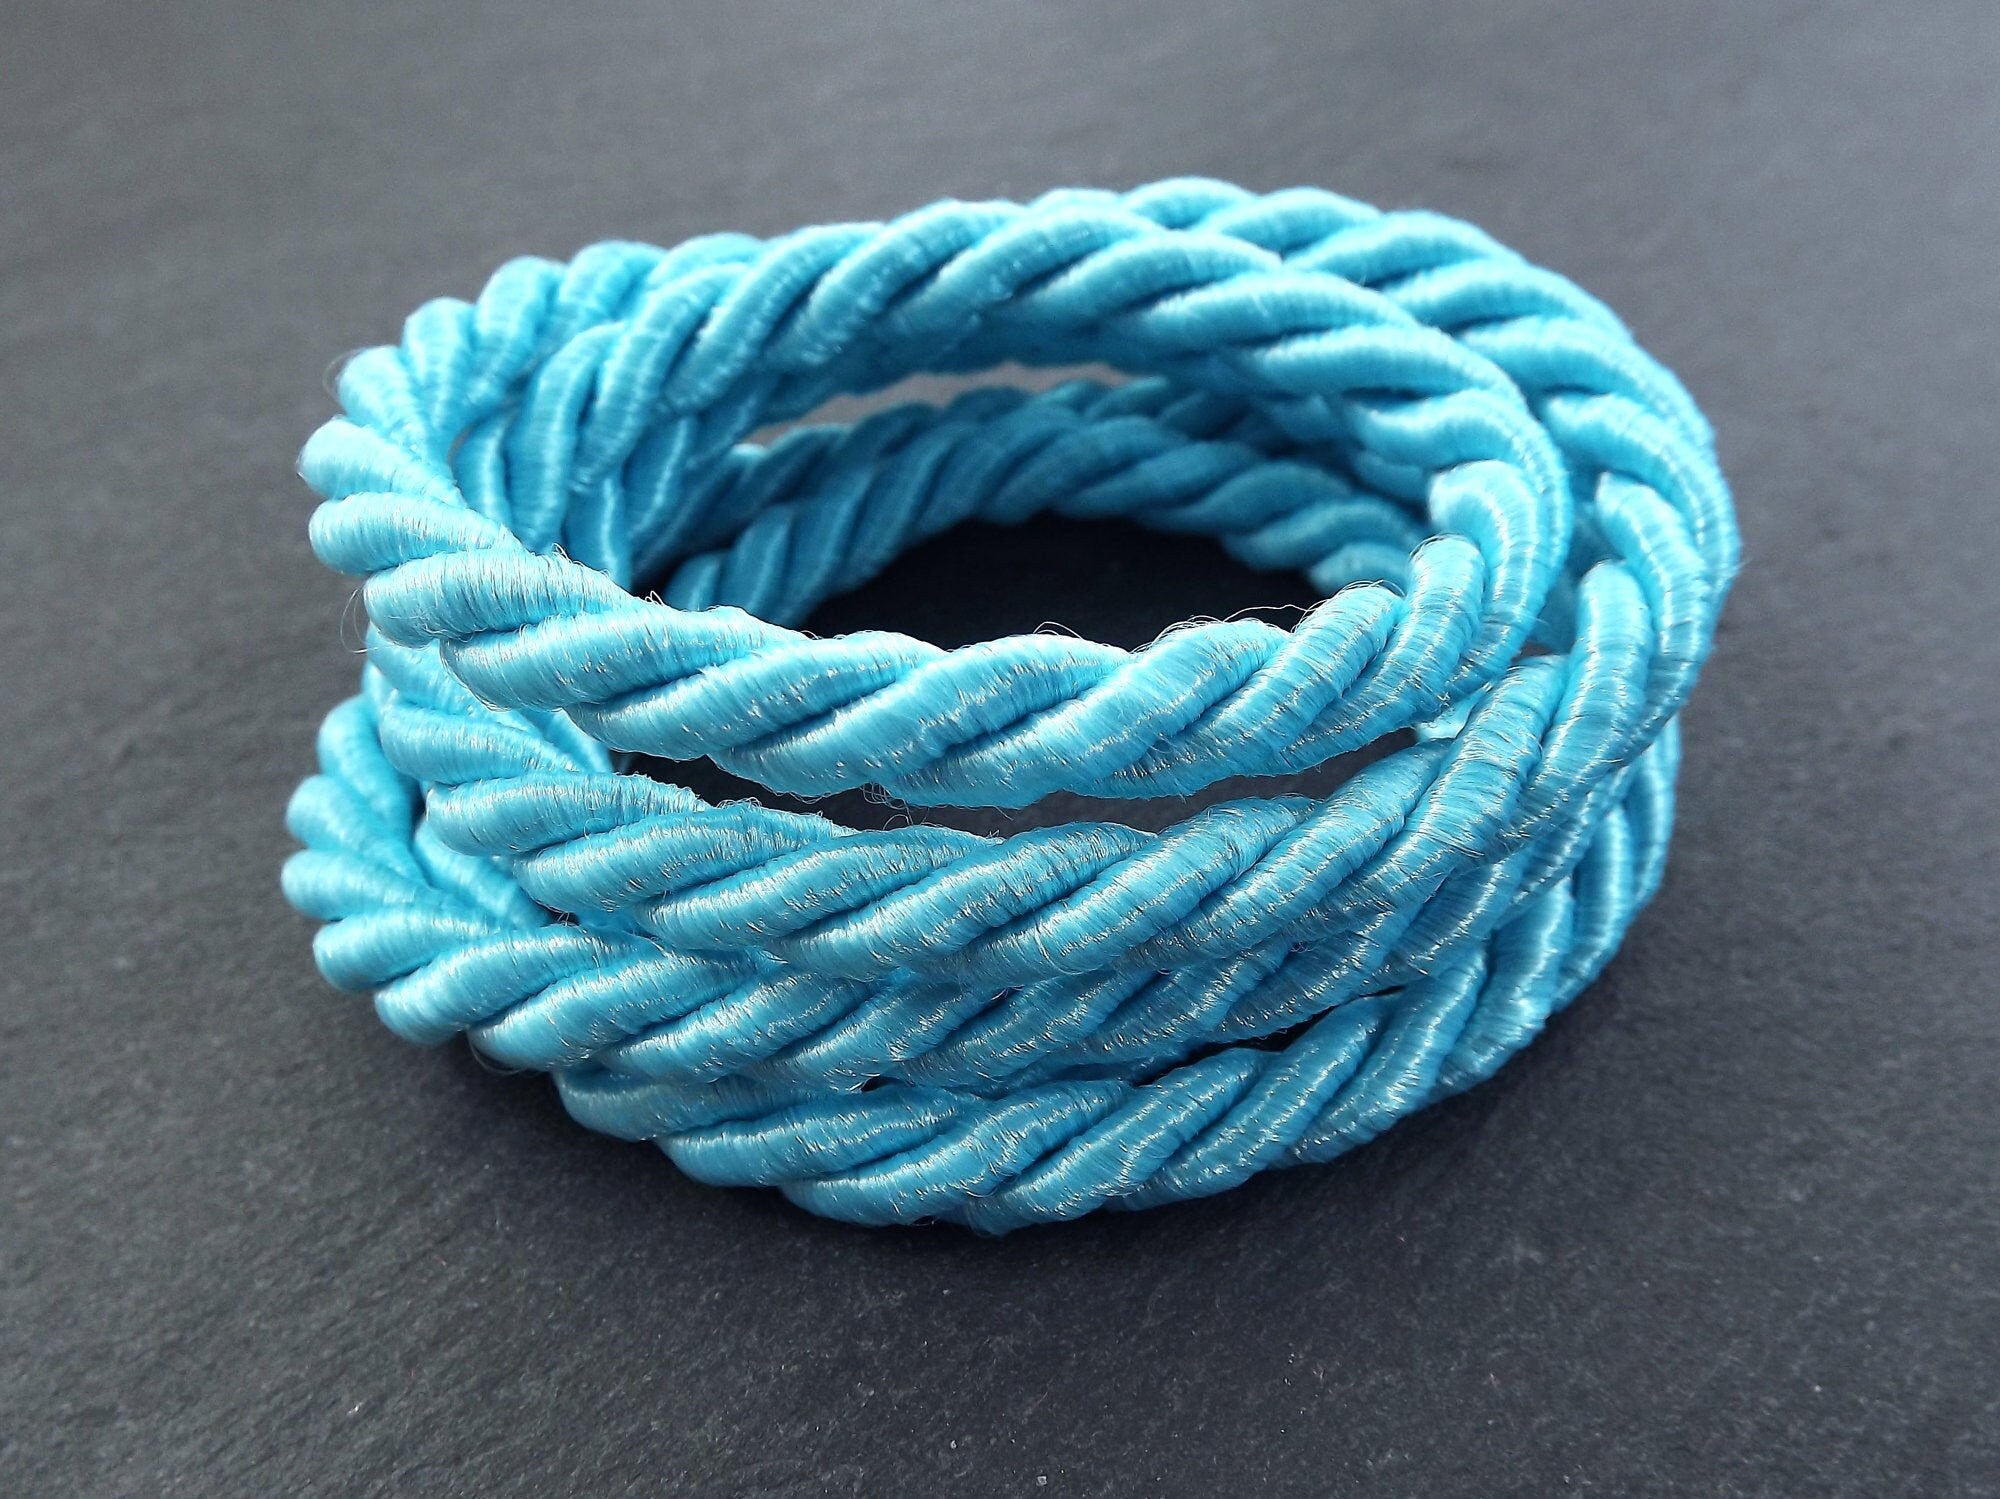 Turquoise 7mm Twisted Rayon Satin Rope Silk Braid Cord - 3 Ply Twist - 1 meters - 1.09 Yards